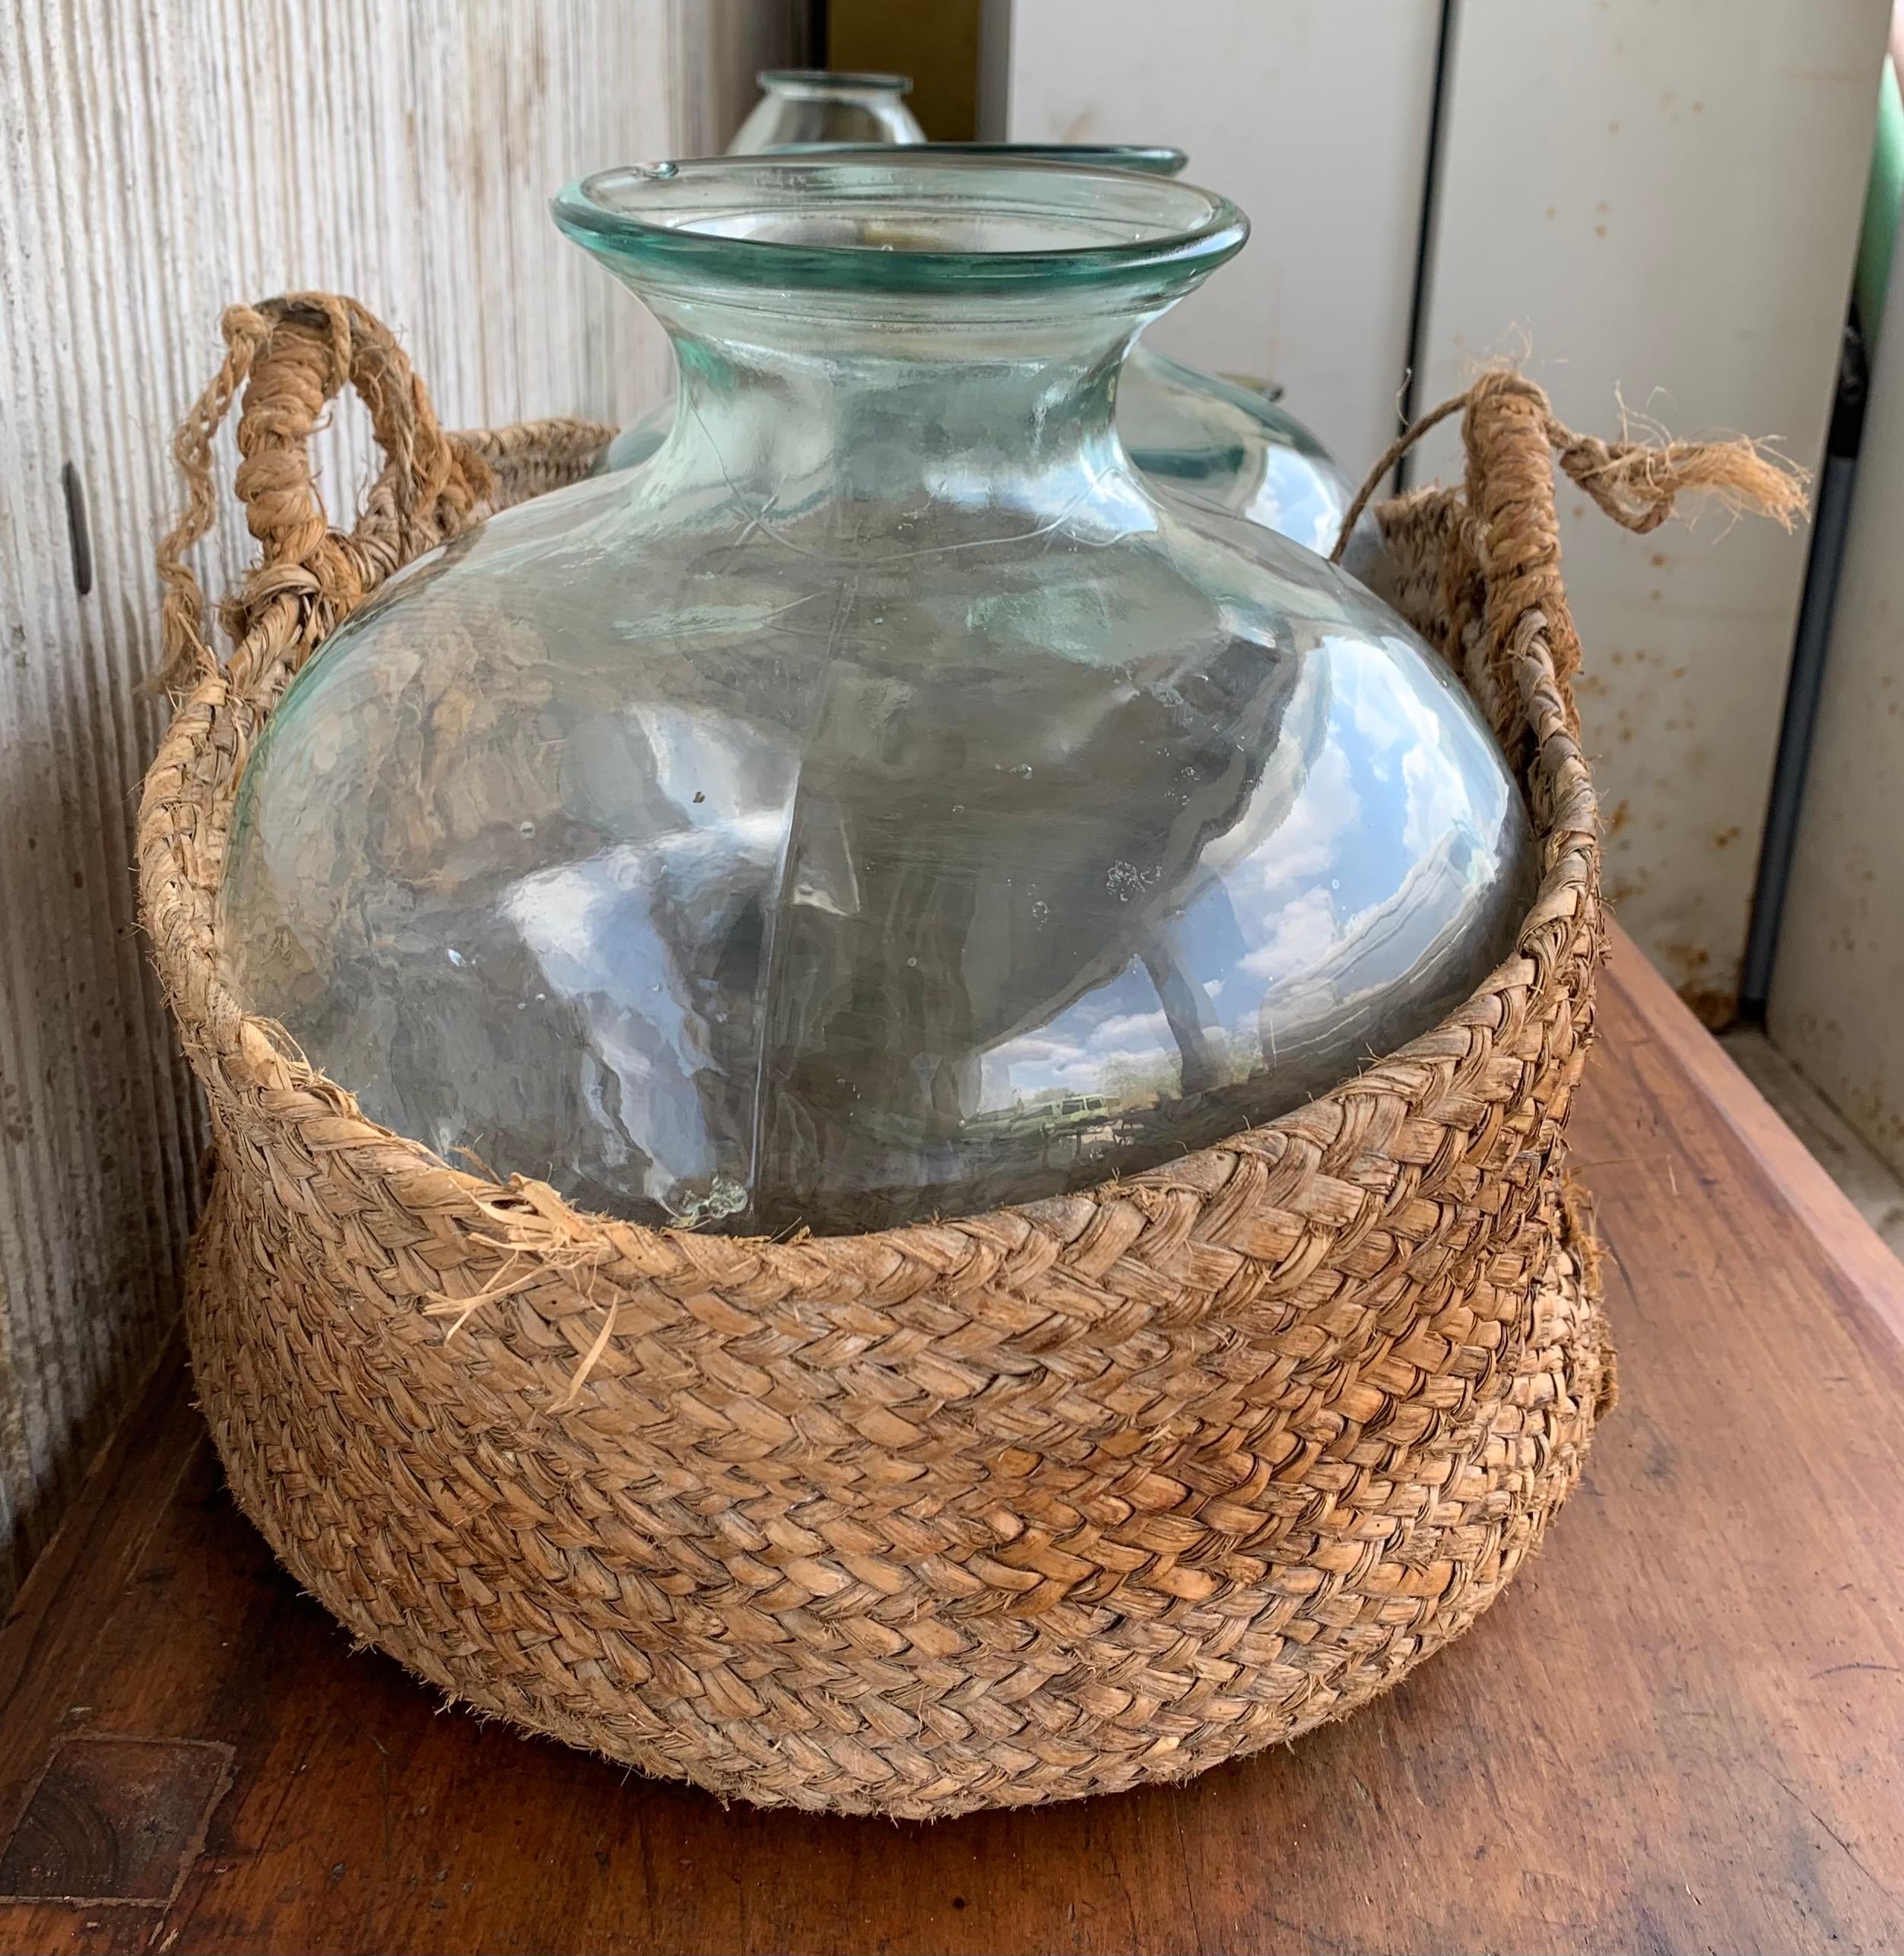 19th Century Set of 2 Green Glass French Demijohn Bottles with Woven Esparto Basket For Sale